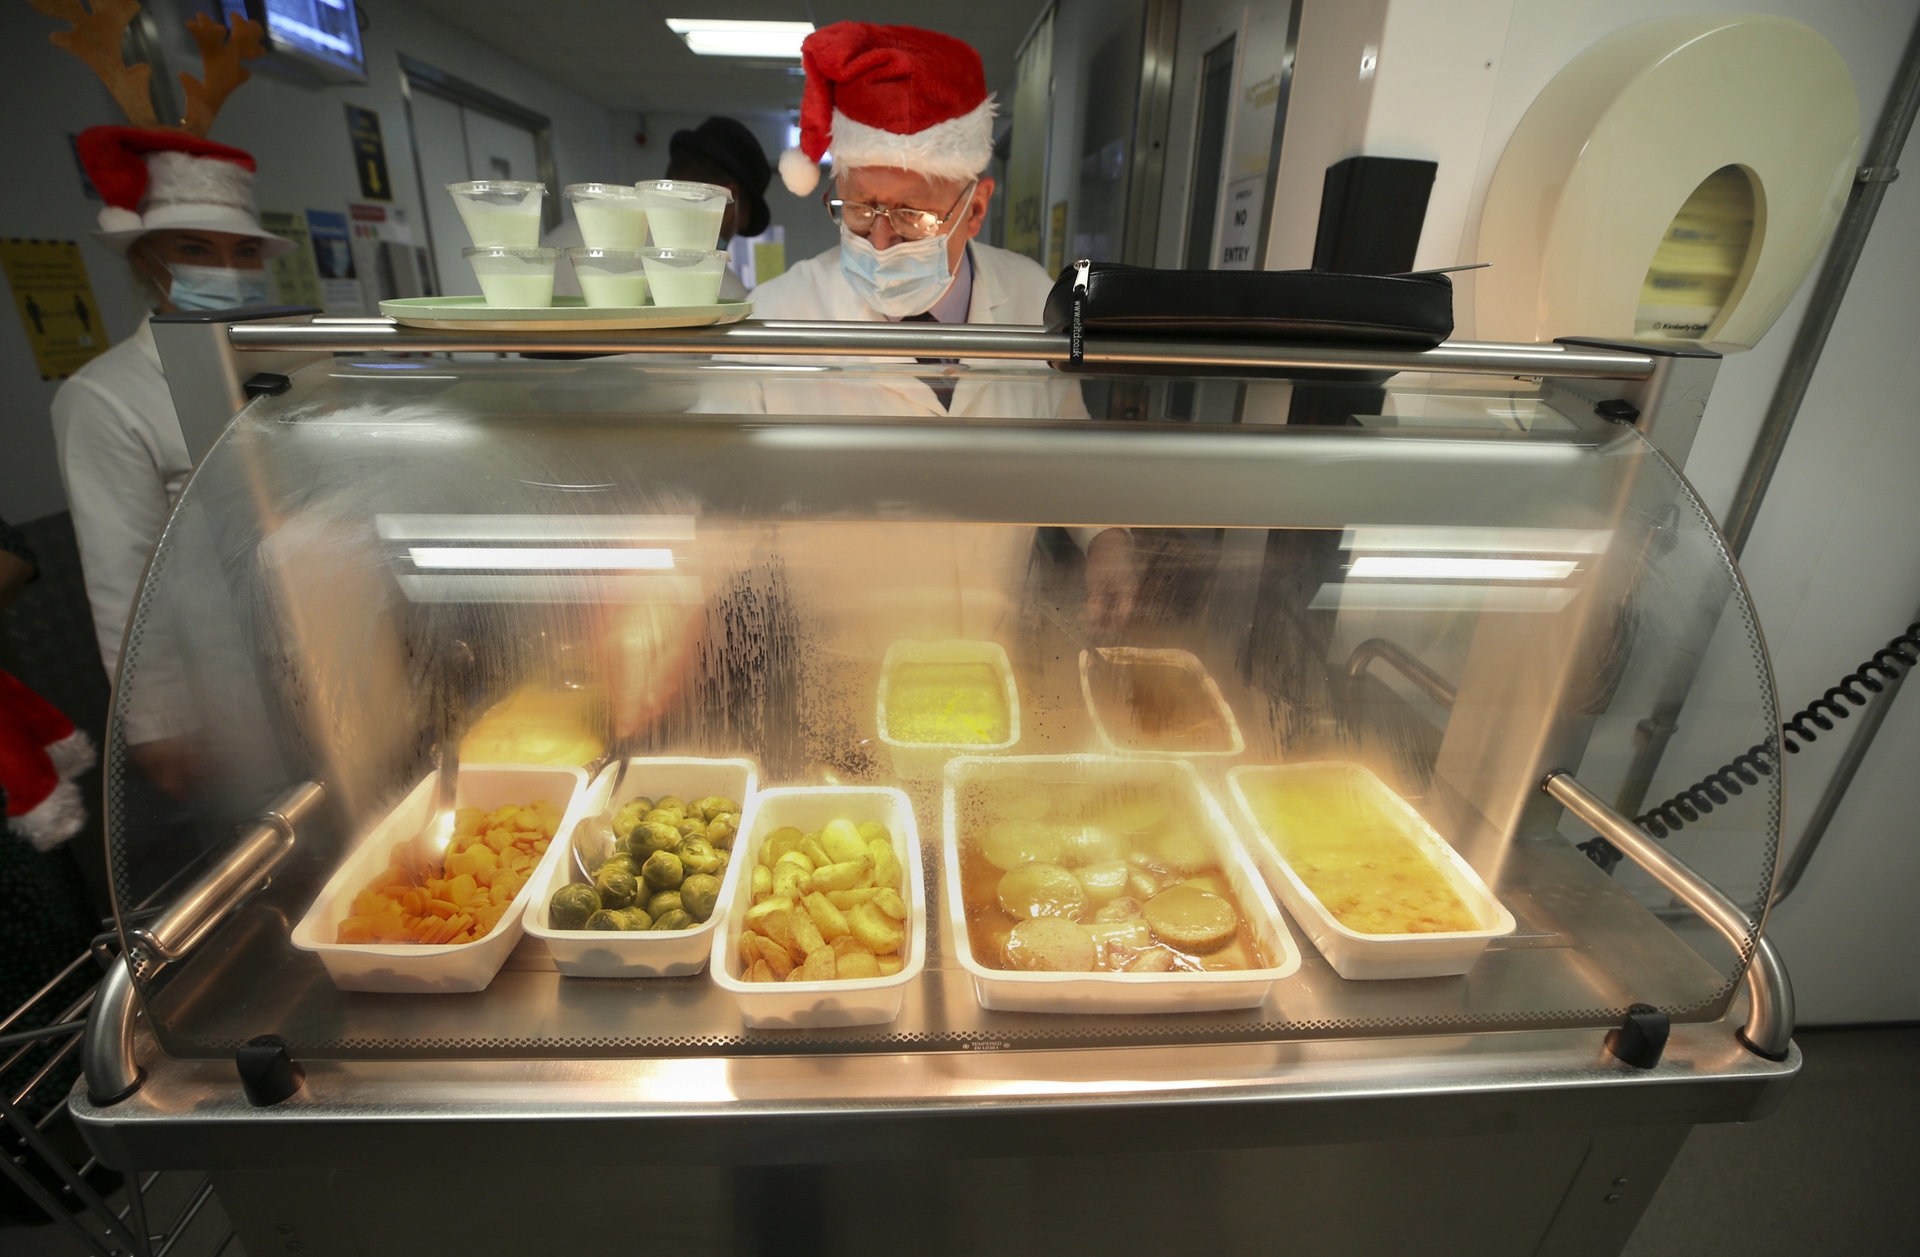 Catering staff are set to feed thousands of patients in Glasgow.